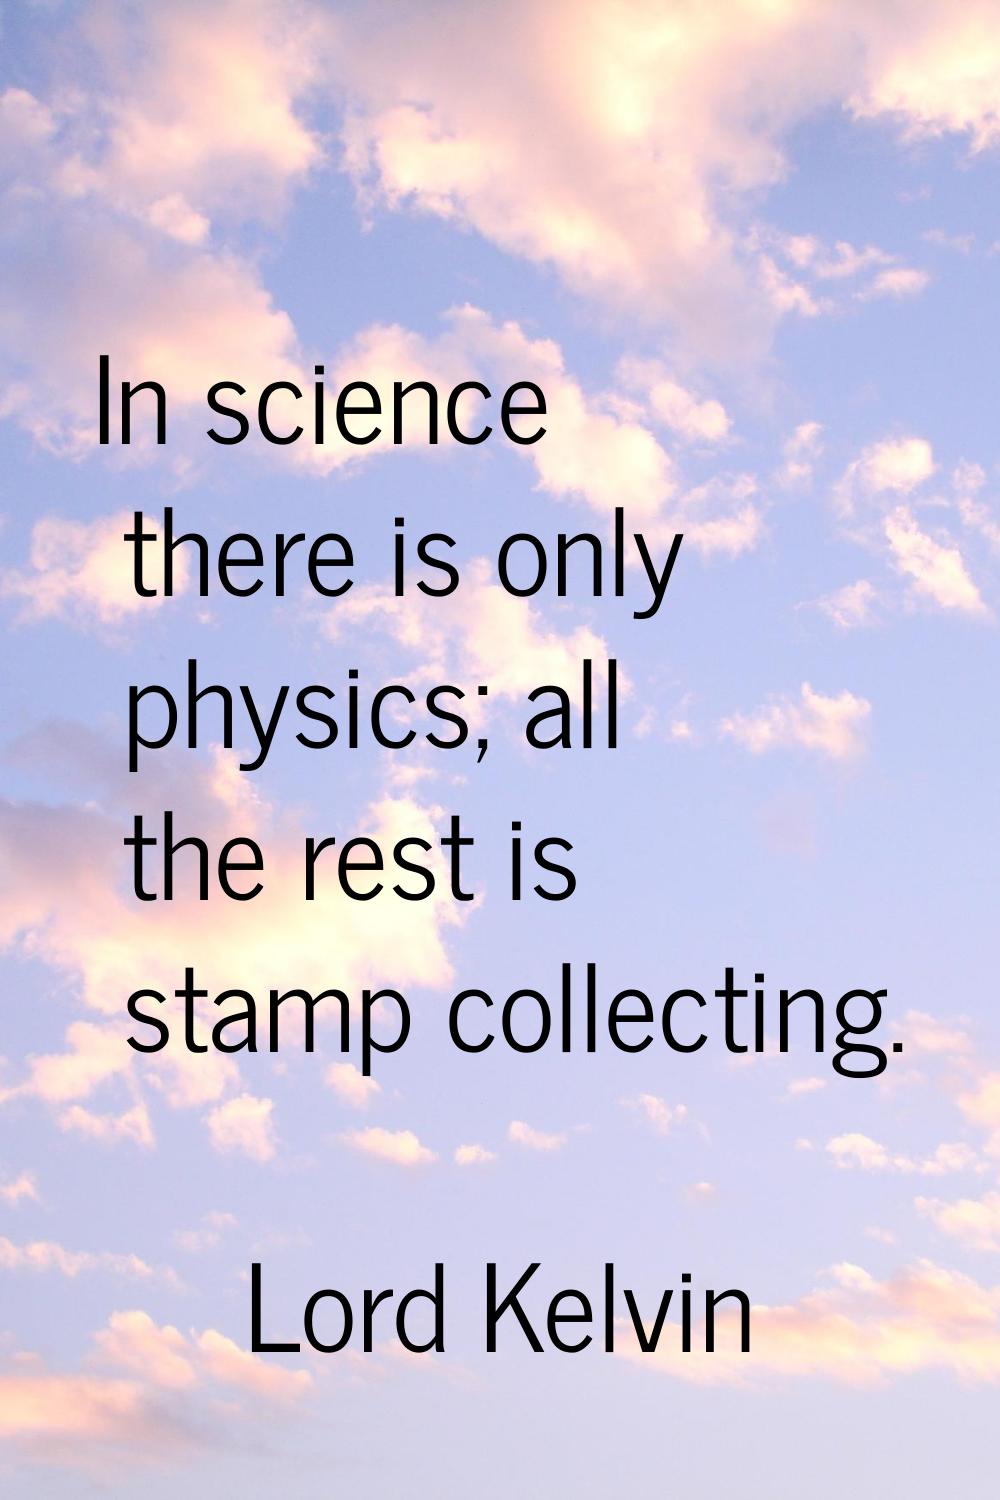 In science there is only physics; all the rest is stamp collecting.